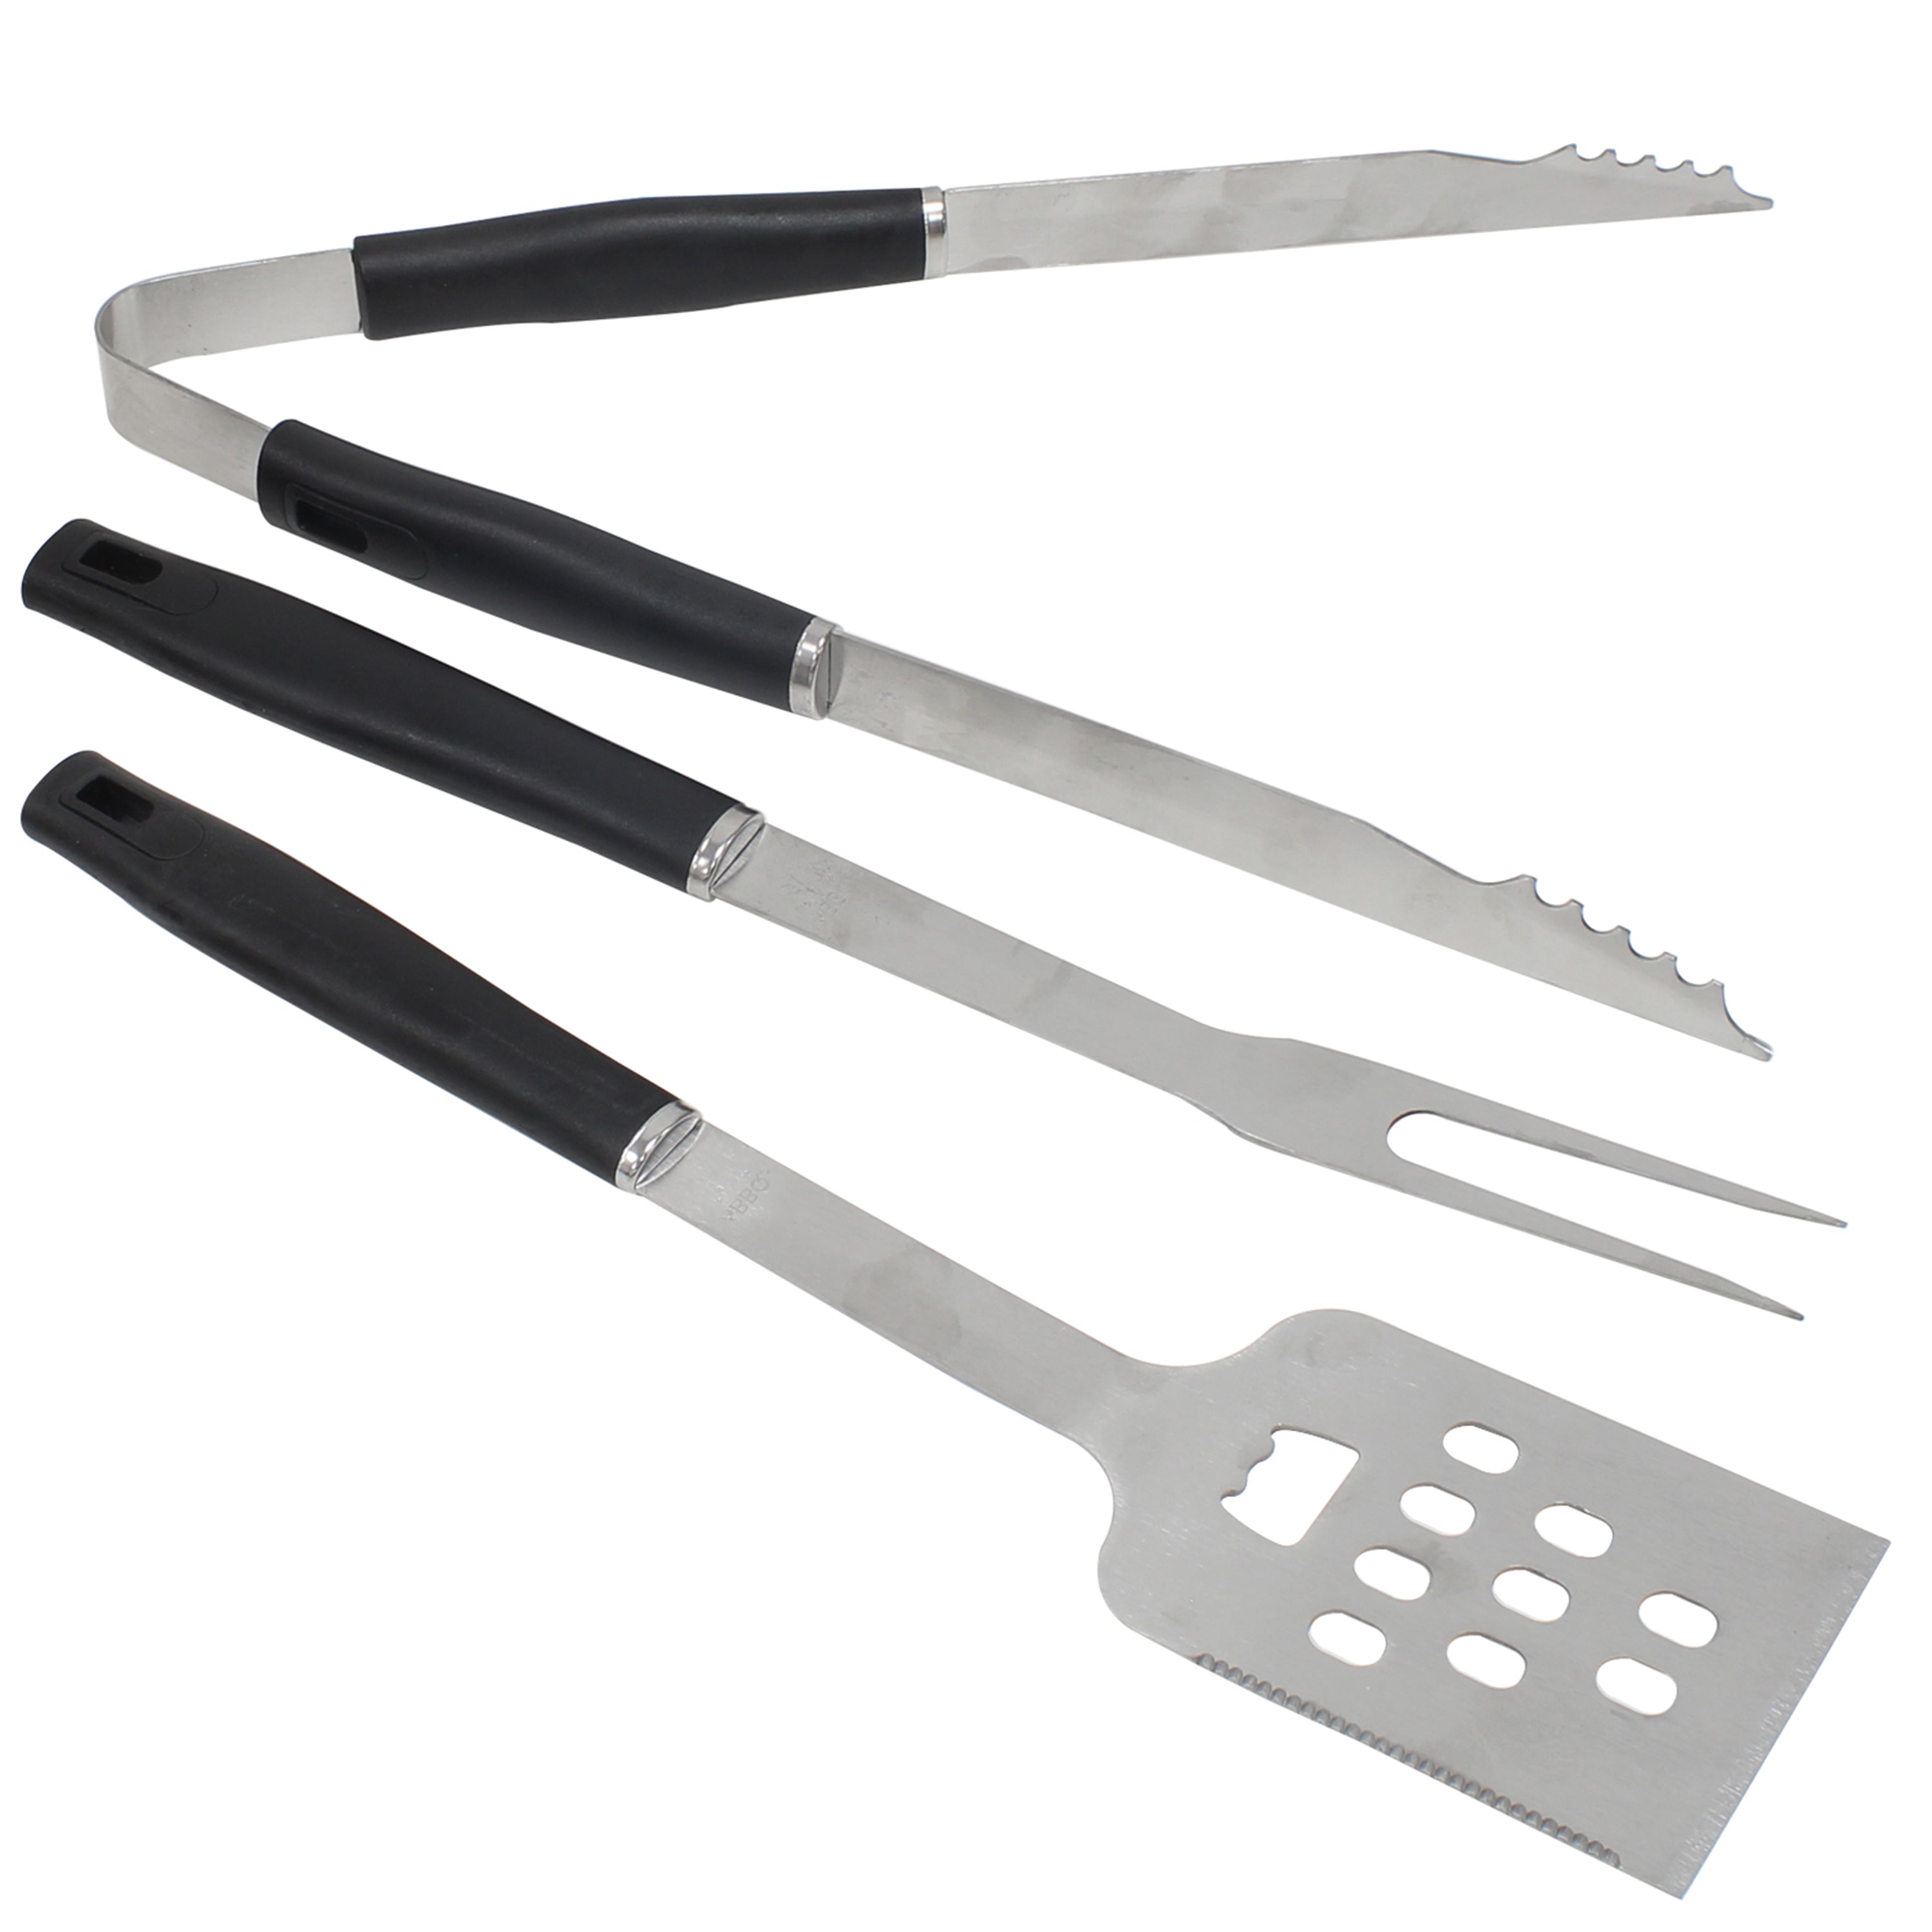 BBQ Tool Set of 3 Pieces - Ecolifestyle.shop